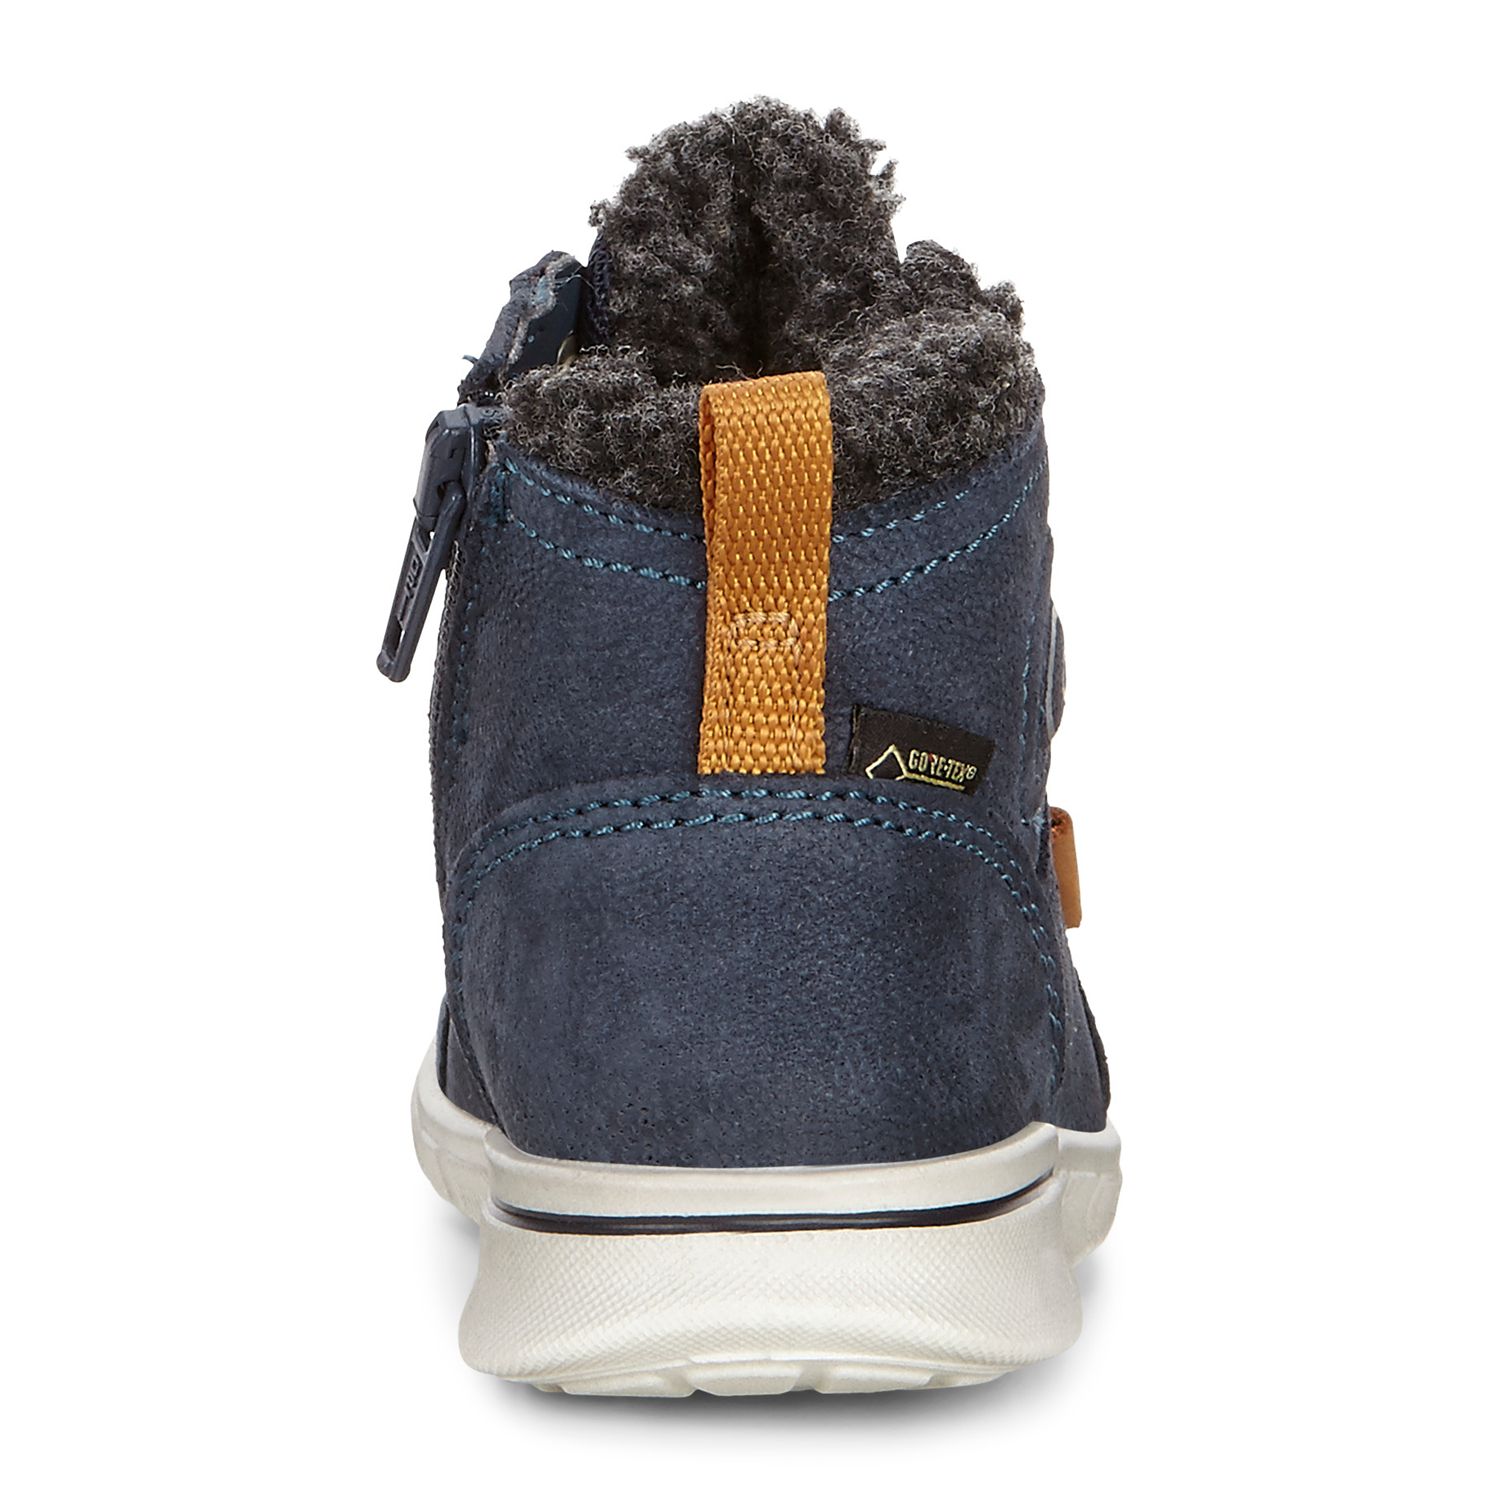 Buy ECCO Kids' First Lace-Up Trainers Online at johnlewis.com